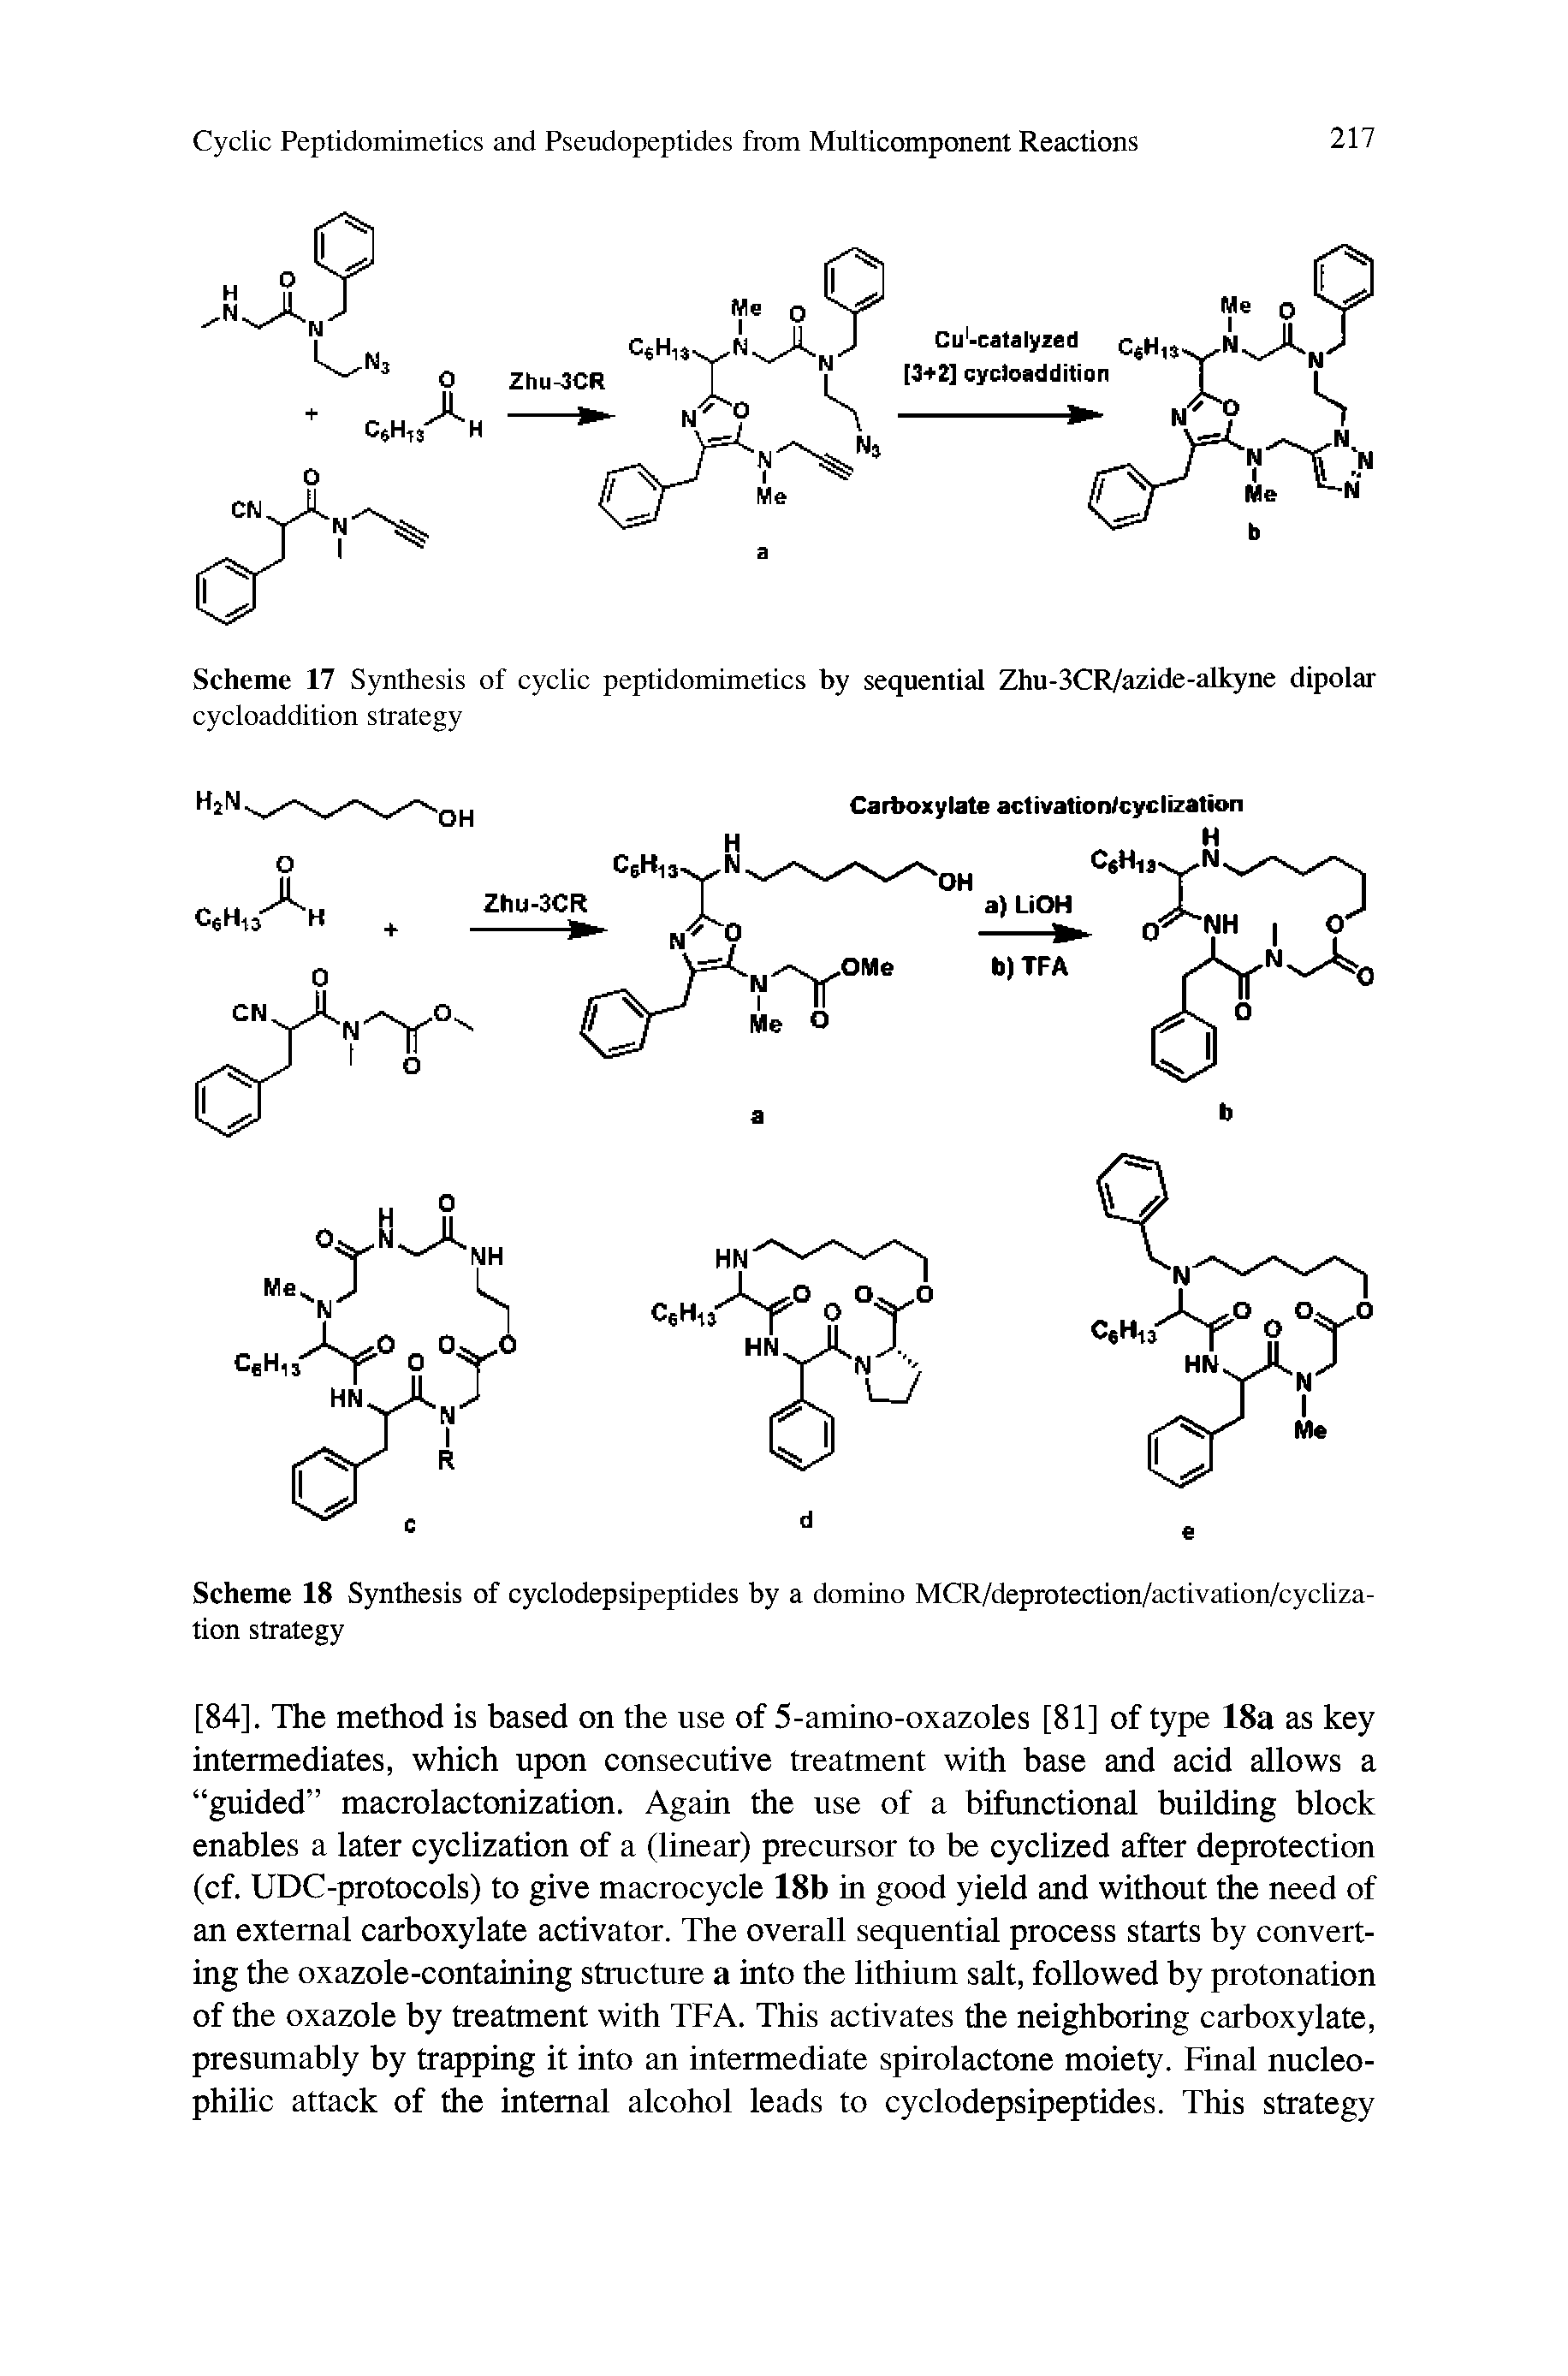 Scheme 17 Synthesis of cyclic peptidomimetics by sequential Zhu-3CR/azide-alkyne dipolar cycloaddition strategy...